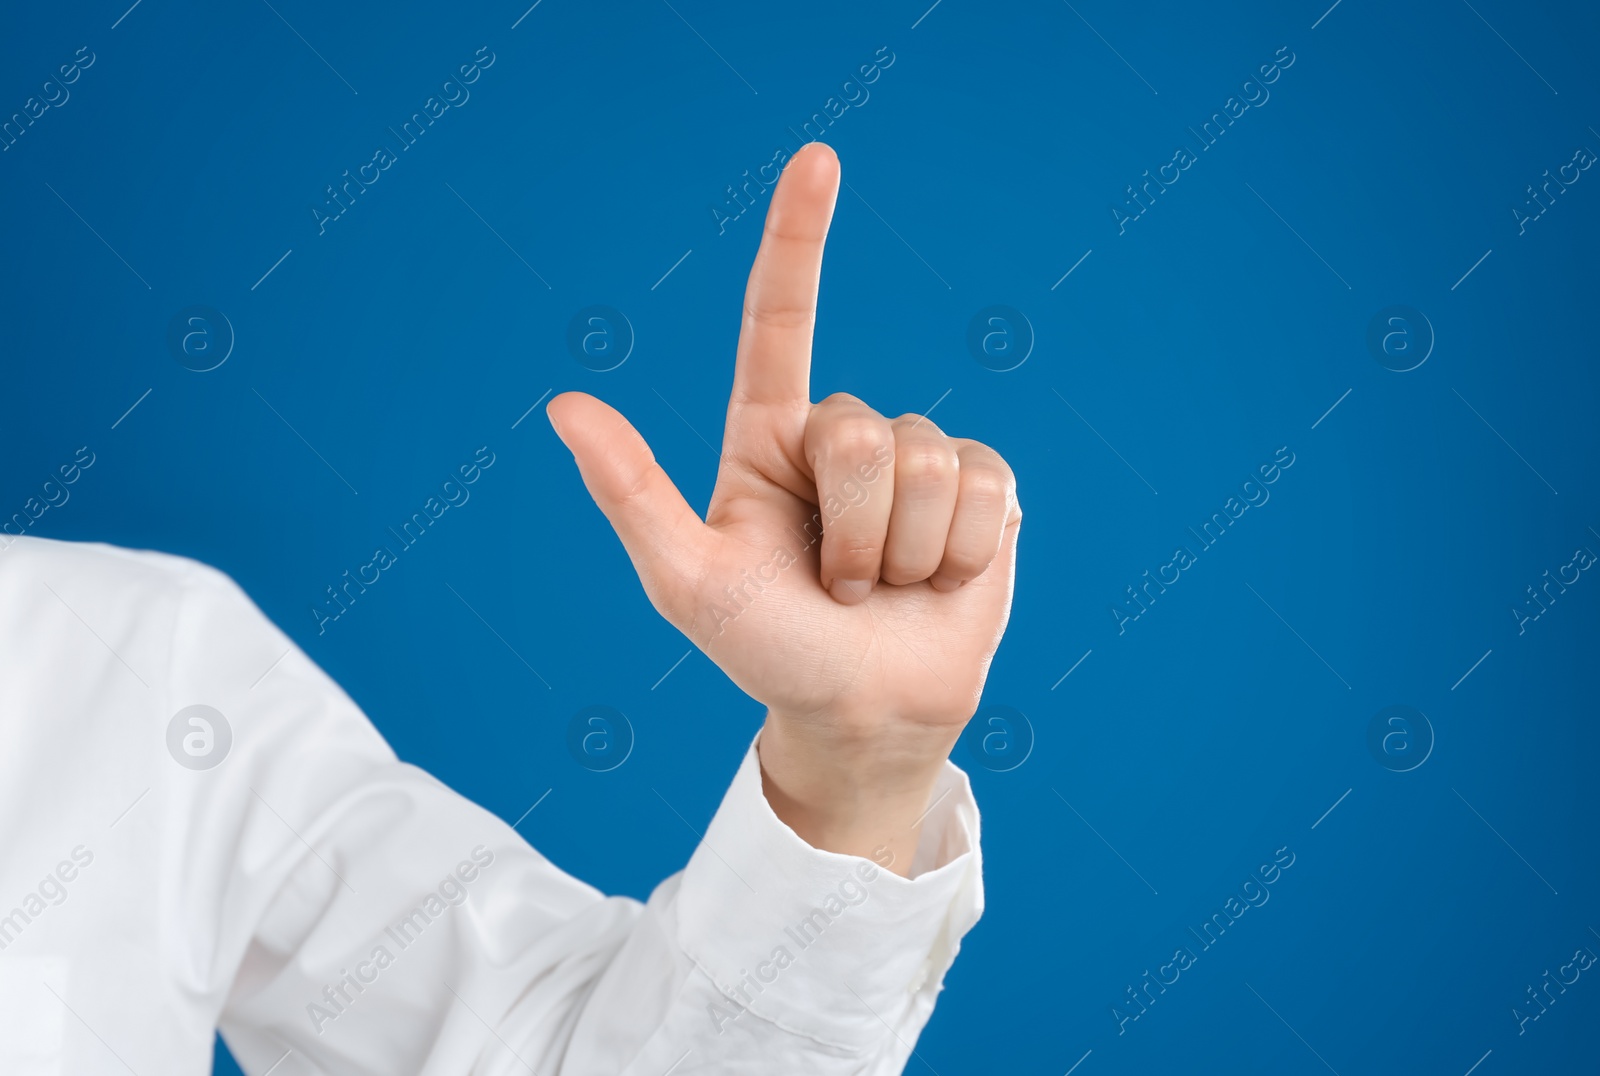 Photo of Young woman touching something against blue background, closeup view